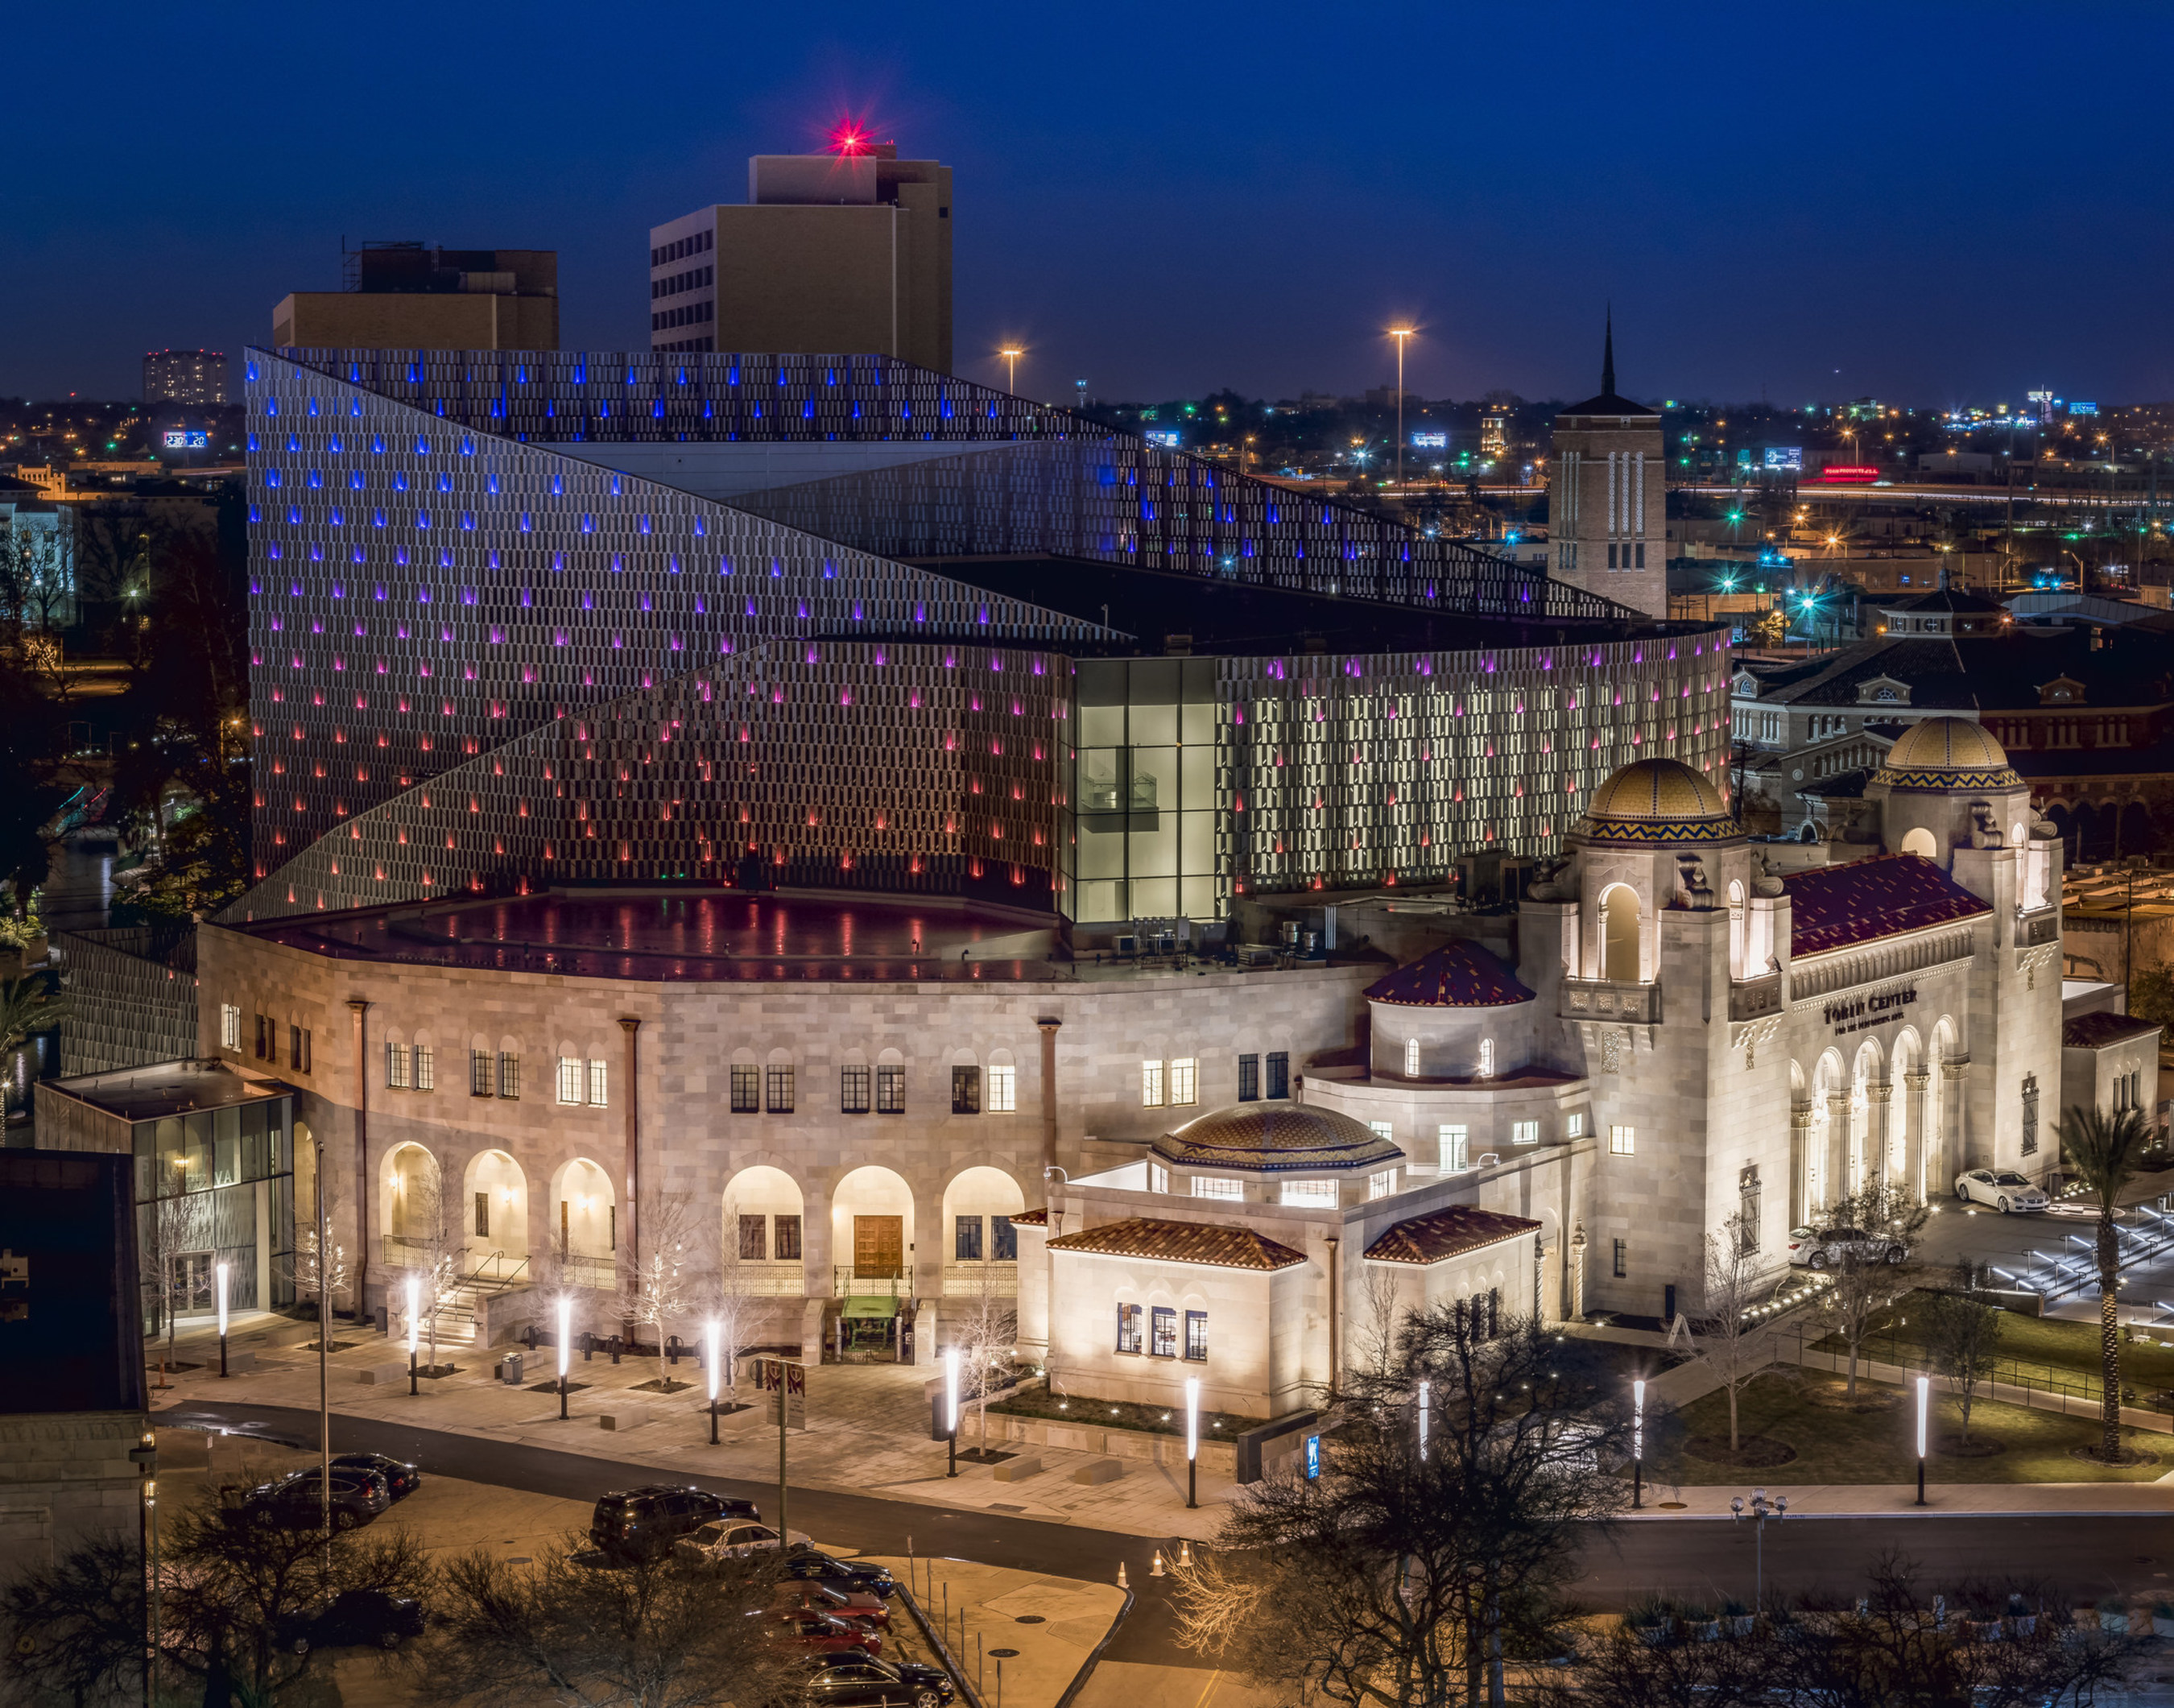 Tobin Center for the Performing Arts. The Tobin Center creates a vibrant connection with its urban context, from the formal entrance of the historic Municipal Auditorium to activating the River Walk Plaza. Image by Andy Crawford.